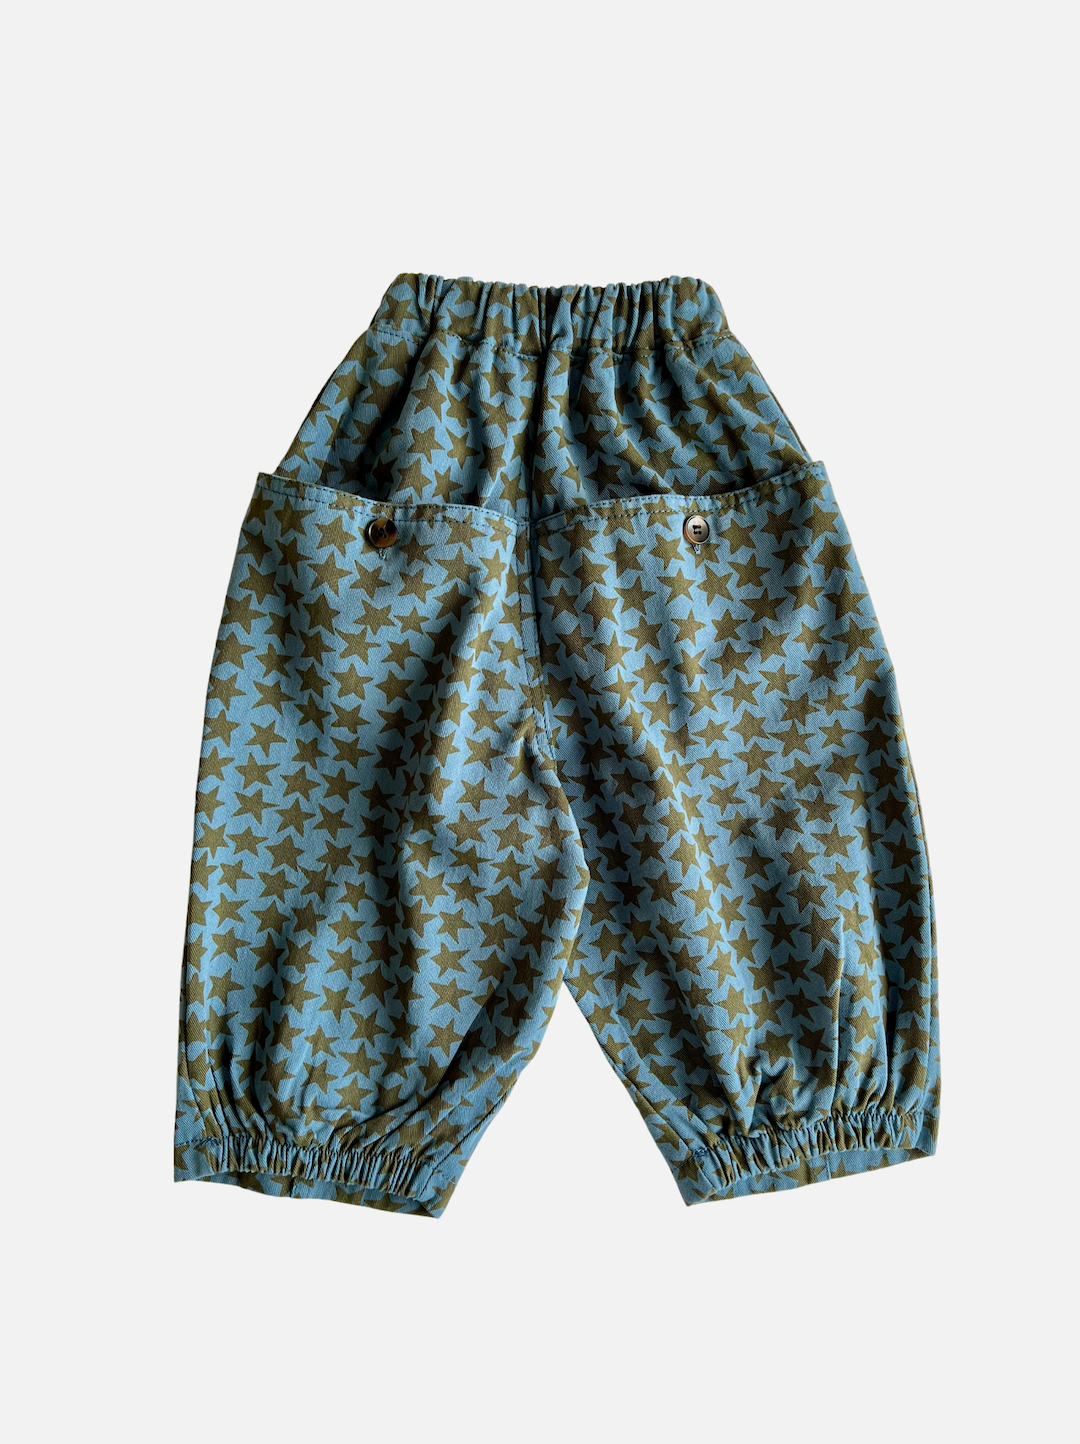 A pair of kids' pants in slate blue with an olive green star pattern, and buttoned back pockets, rear view 